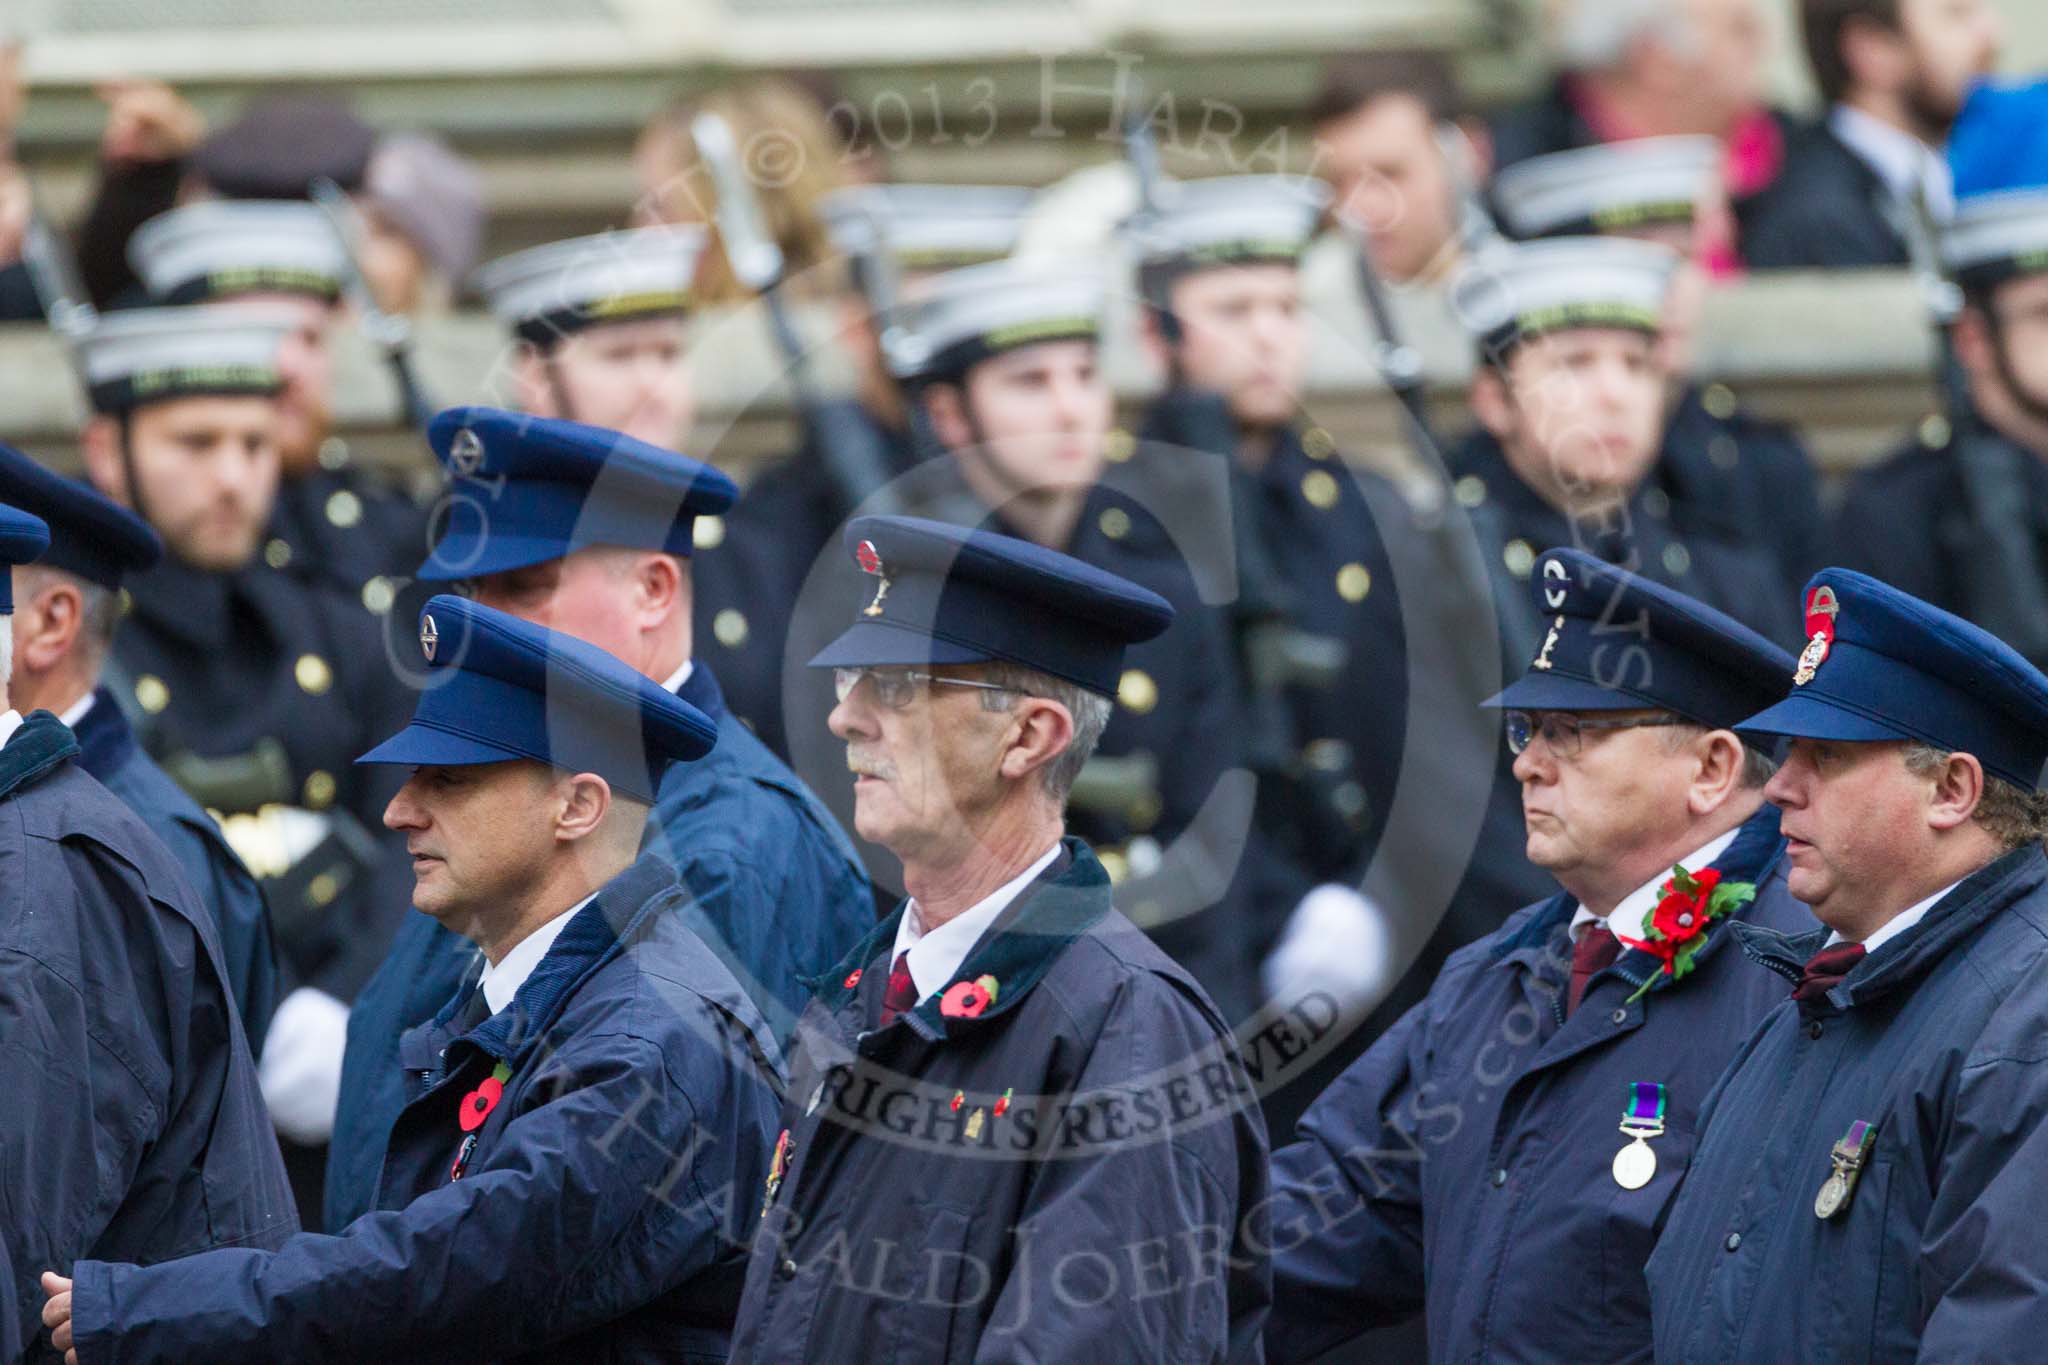 Remembrance Sunday at the Cenotaph 2015: Group M1, Transport for London.
Cenotaph, Whitehall, London SW1,
London,
Greater London,
United Kingdom,
on 08 November 2015 at 12:14, image #1420